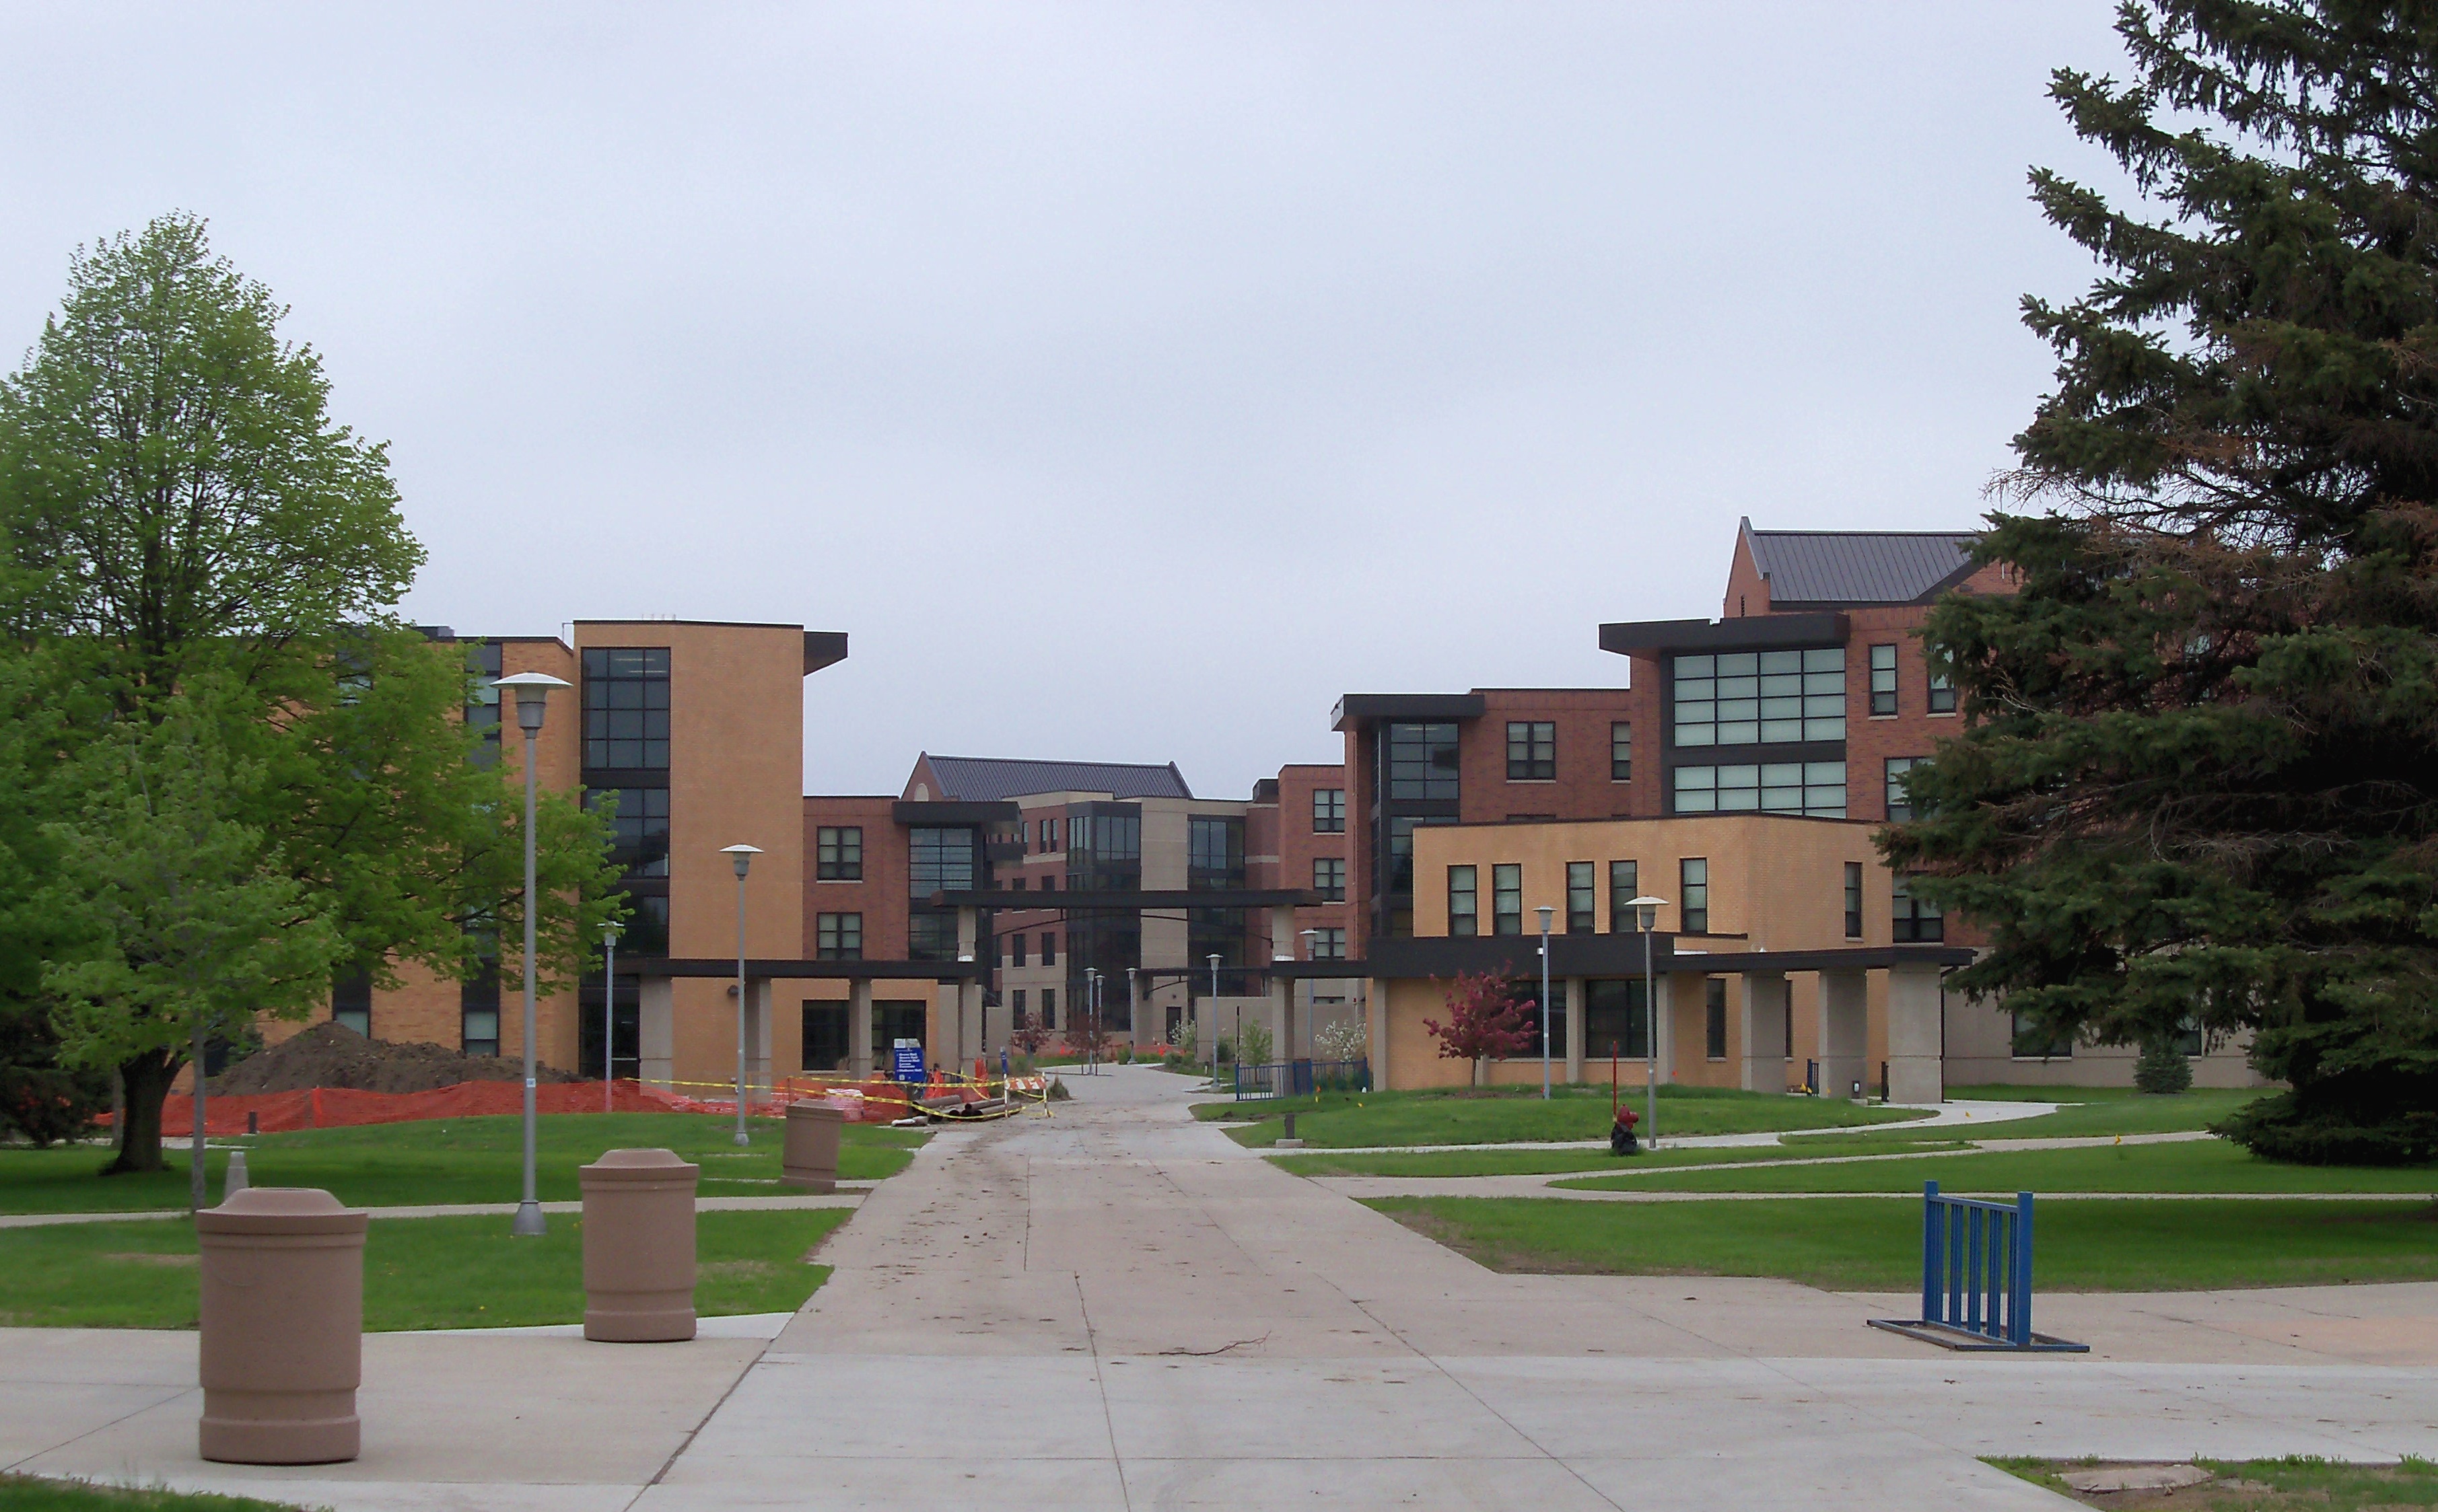 Private Residential Halls For Students - Choices